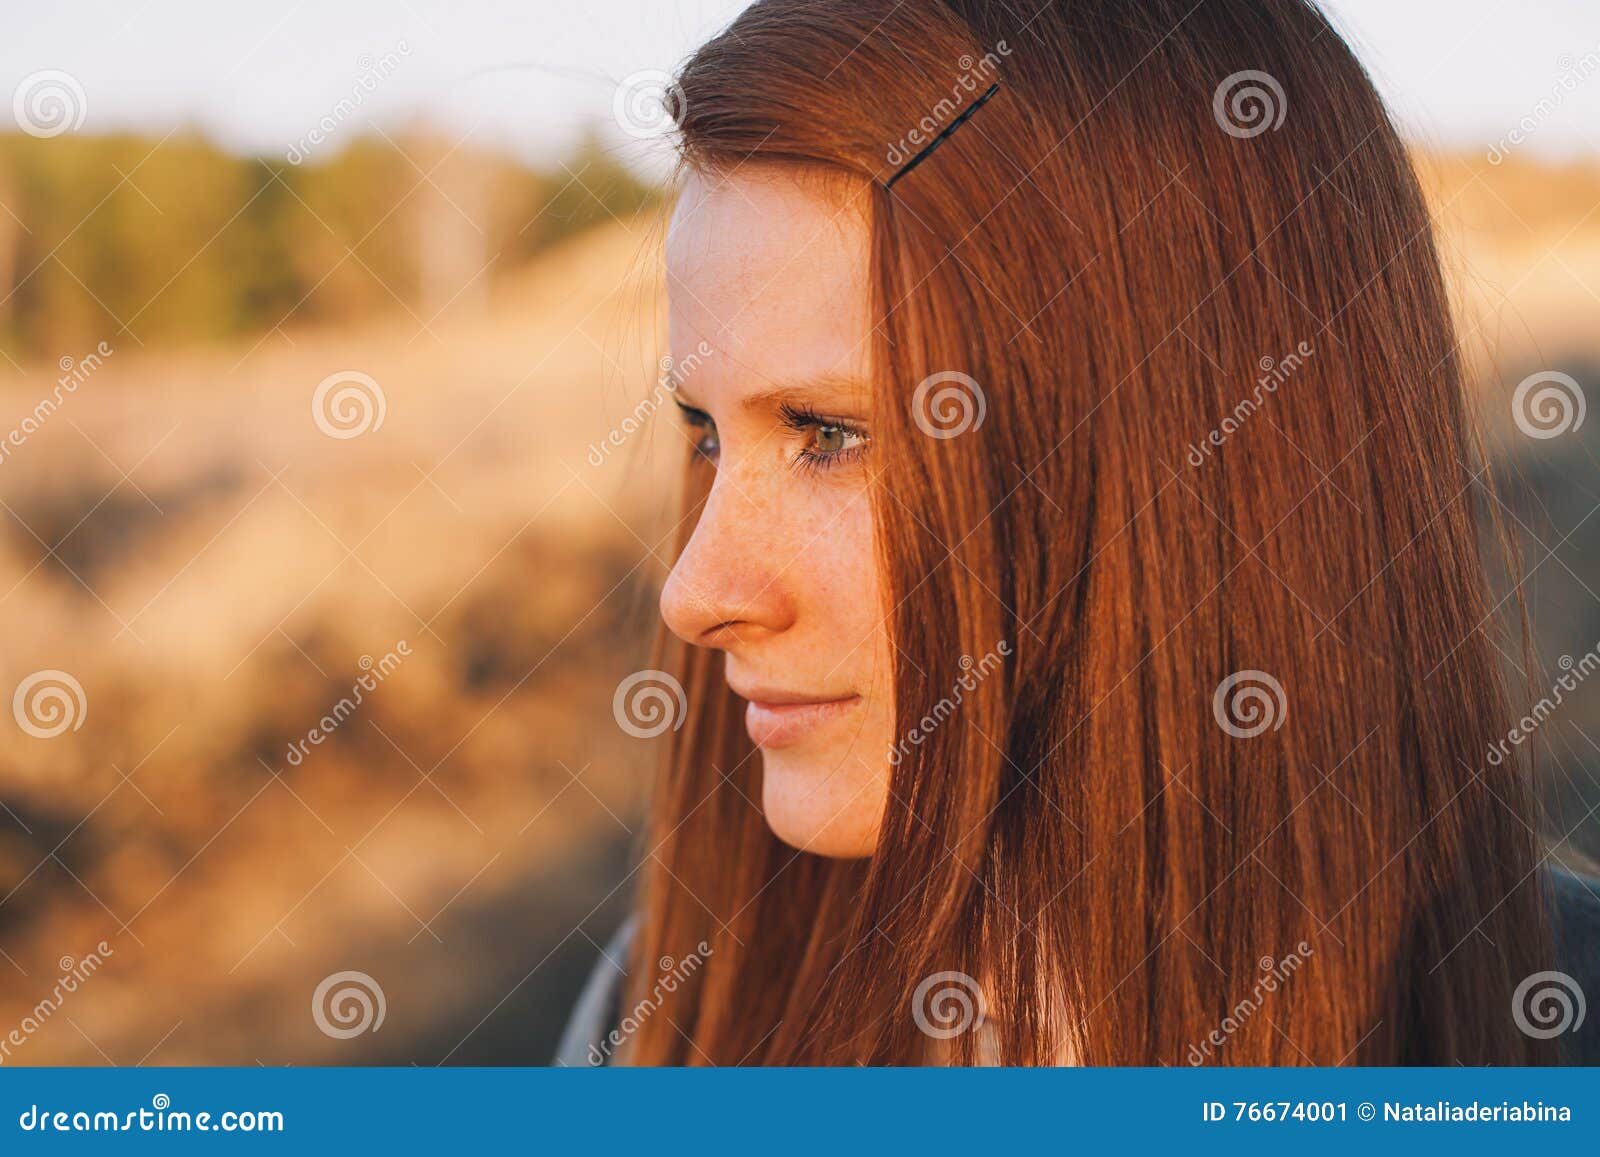 Girl With Red Hair And Freckles In The Sunset Free